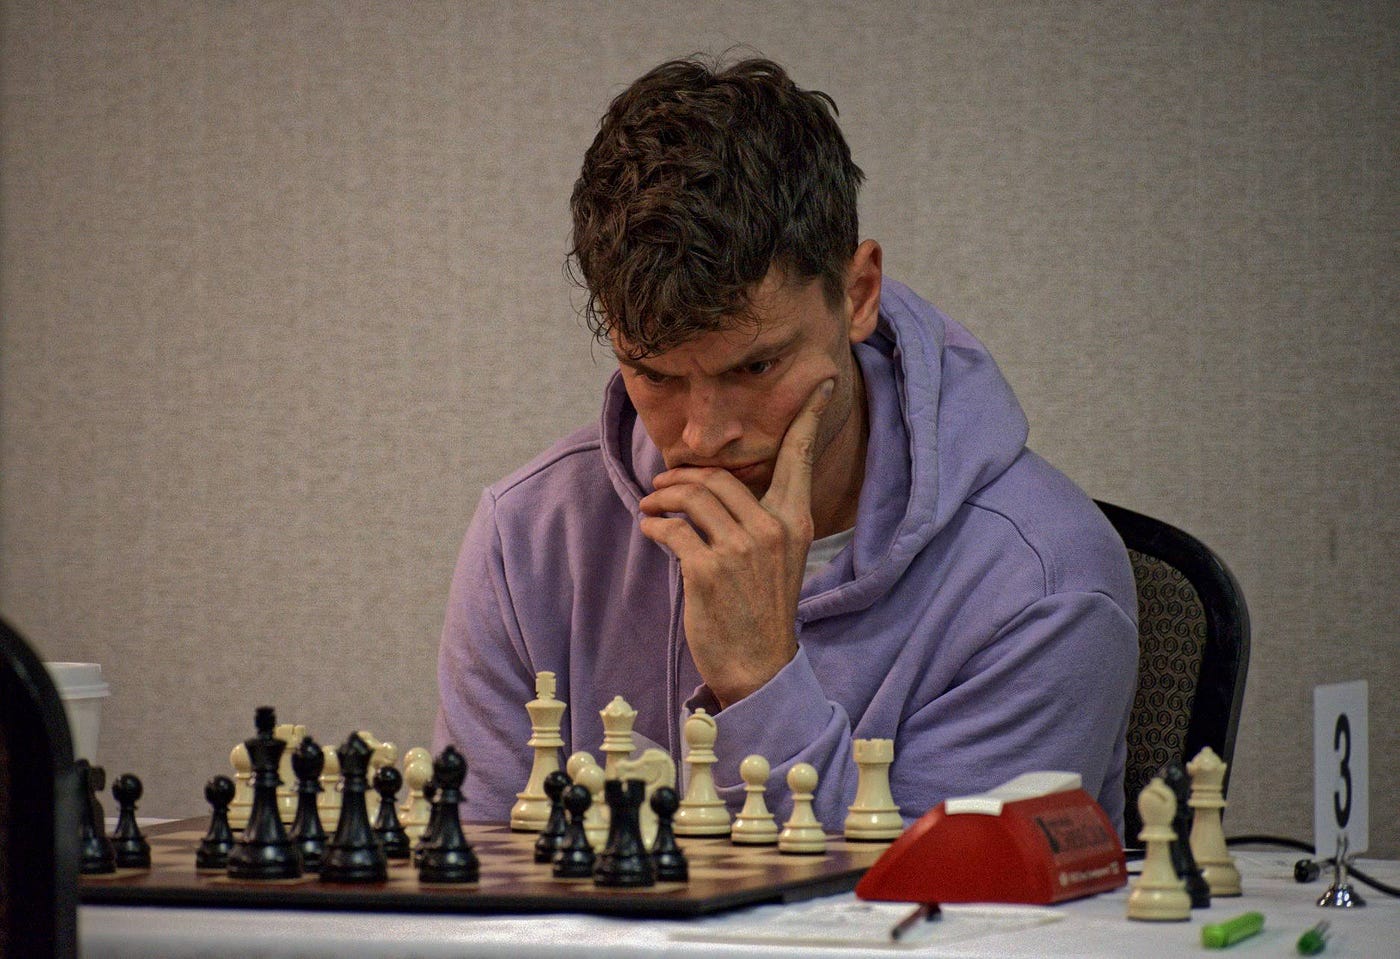 Three reasons why you should play chess · The Badger Herald